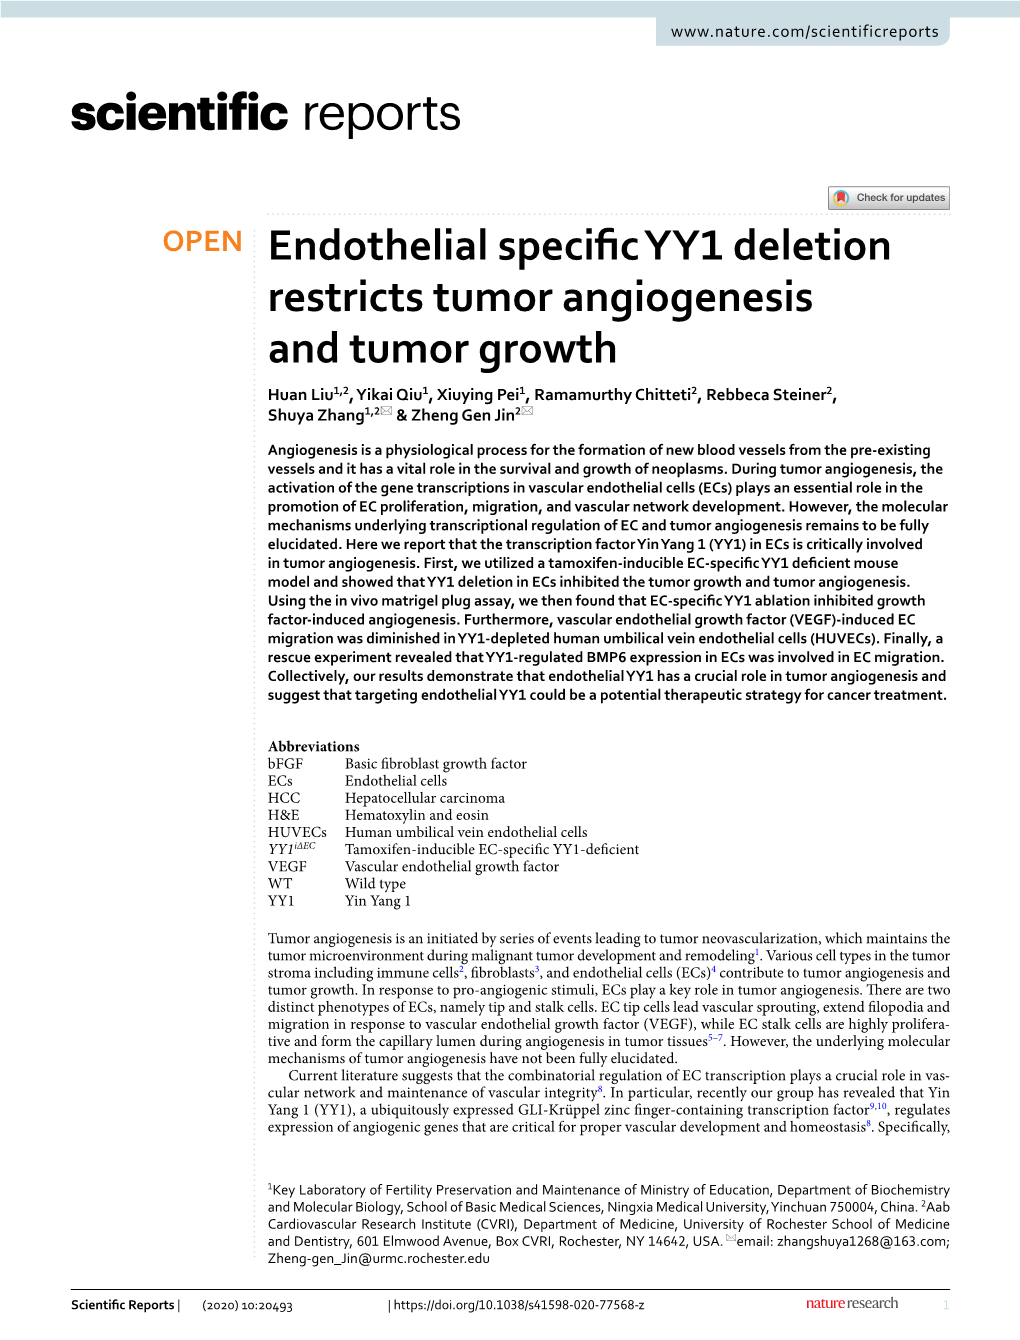 Endothelial Specific YY1 Deletion Restricts Tumor Angiogenesis And